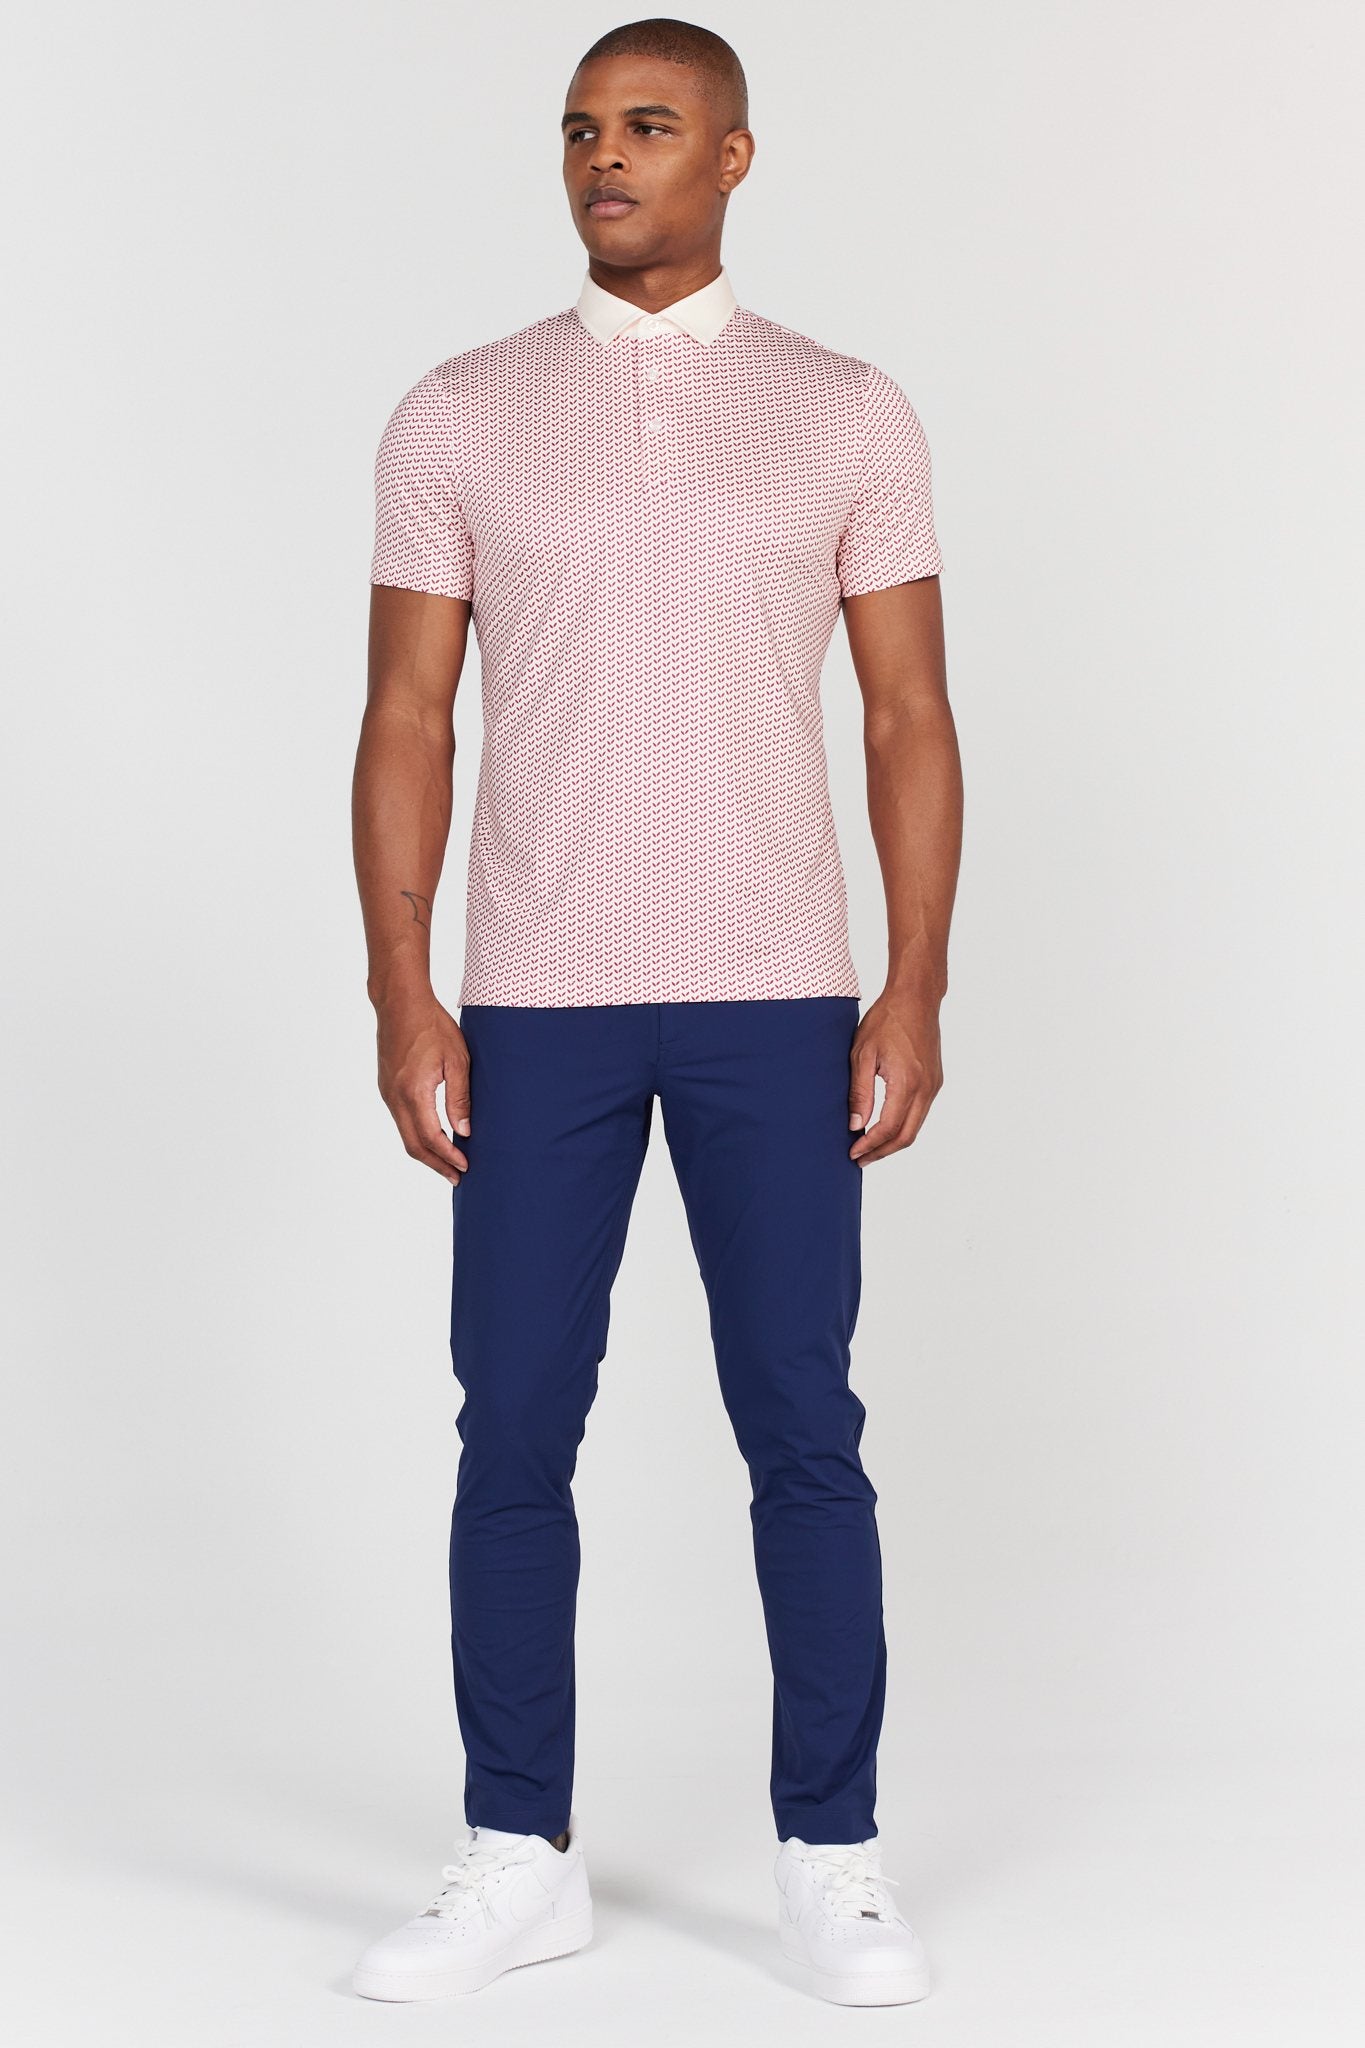 Deweil Polo in Petal Pink